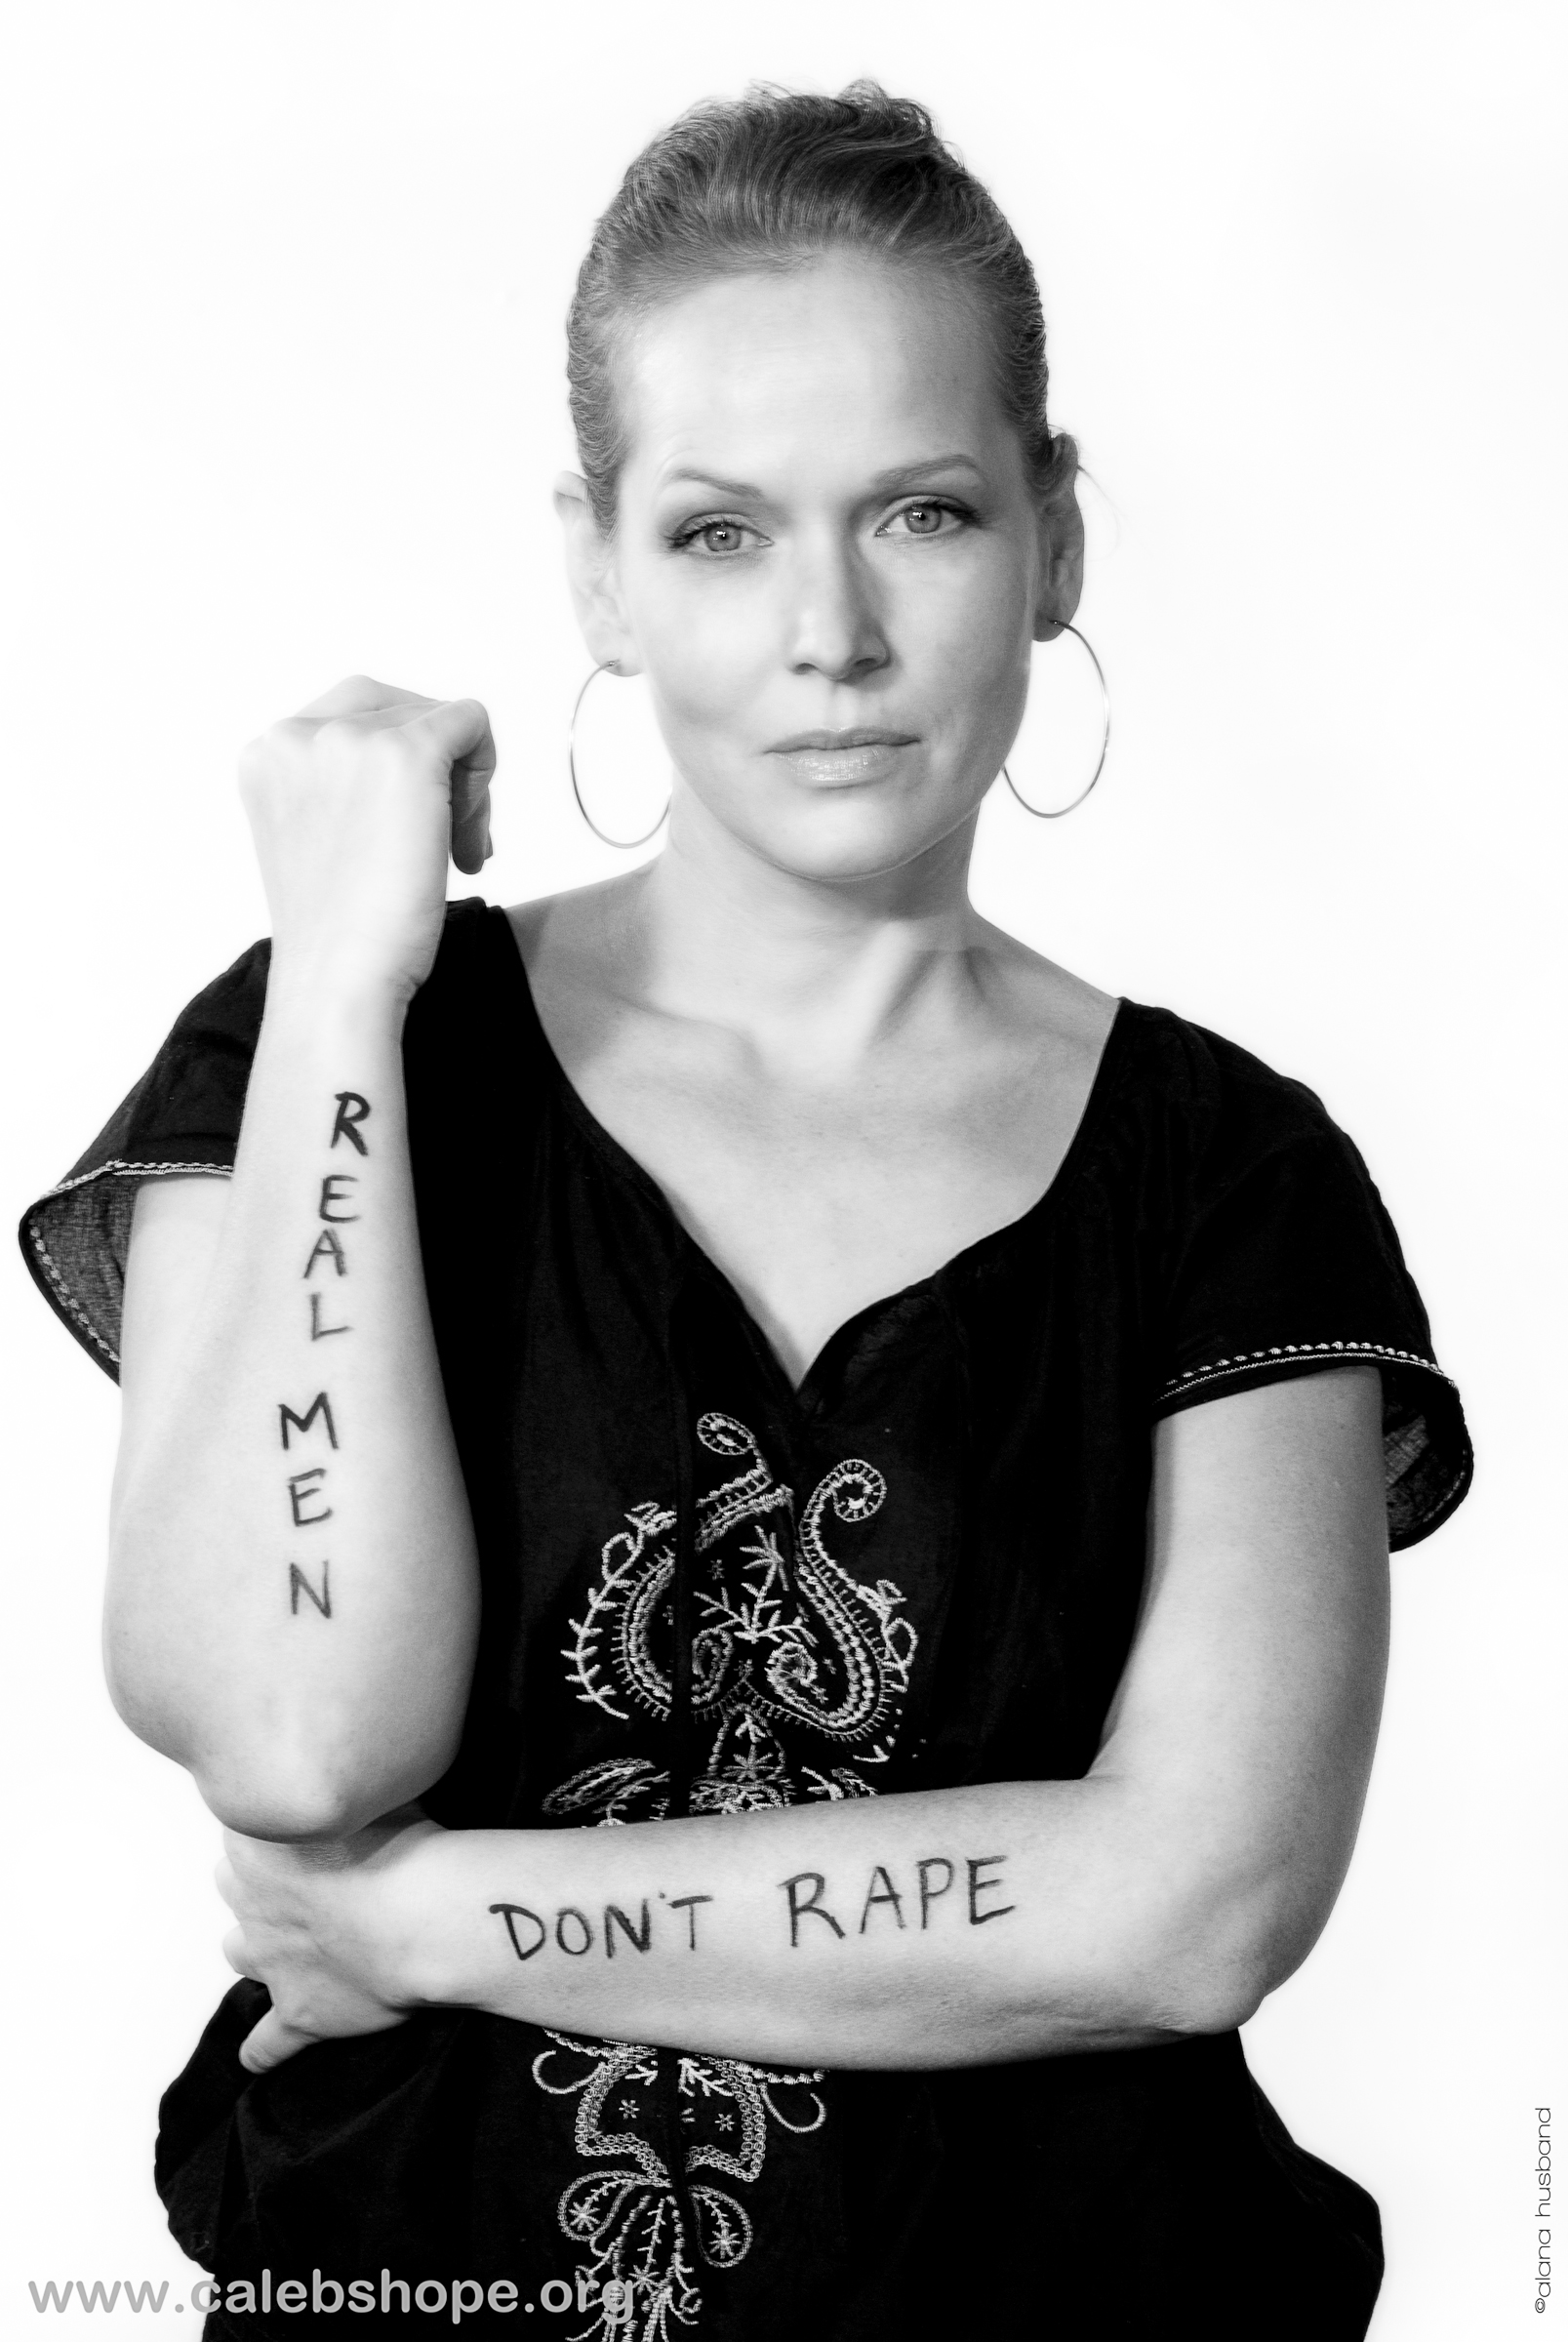 Chelah for the Real Men Don't Rape campaign spearheaded by Caleb's Hope.